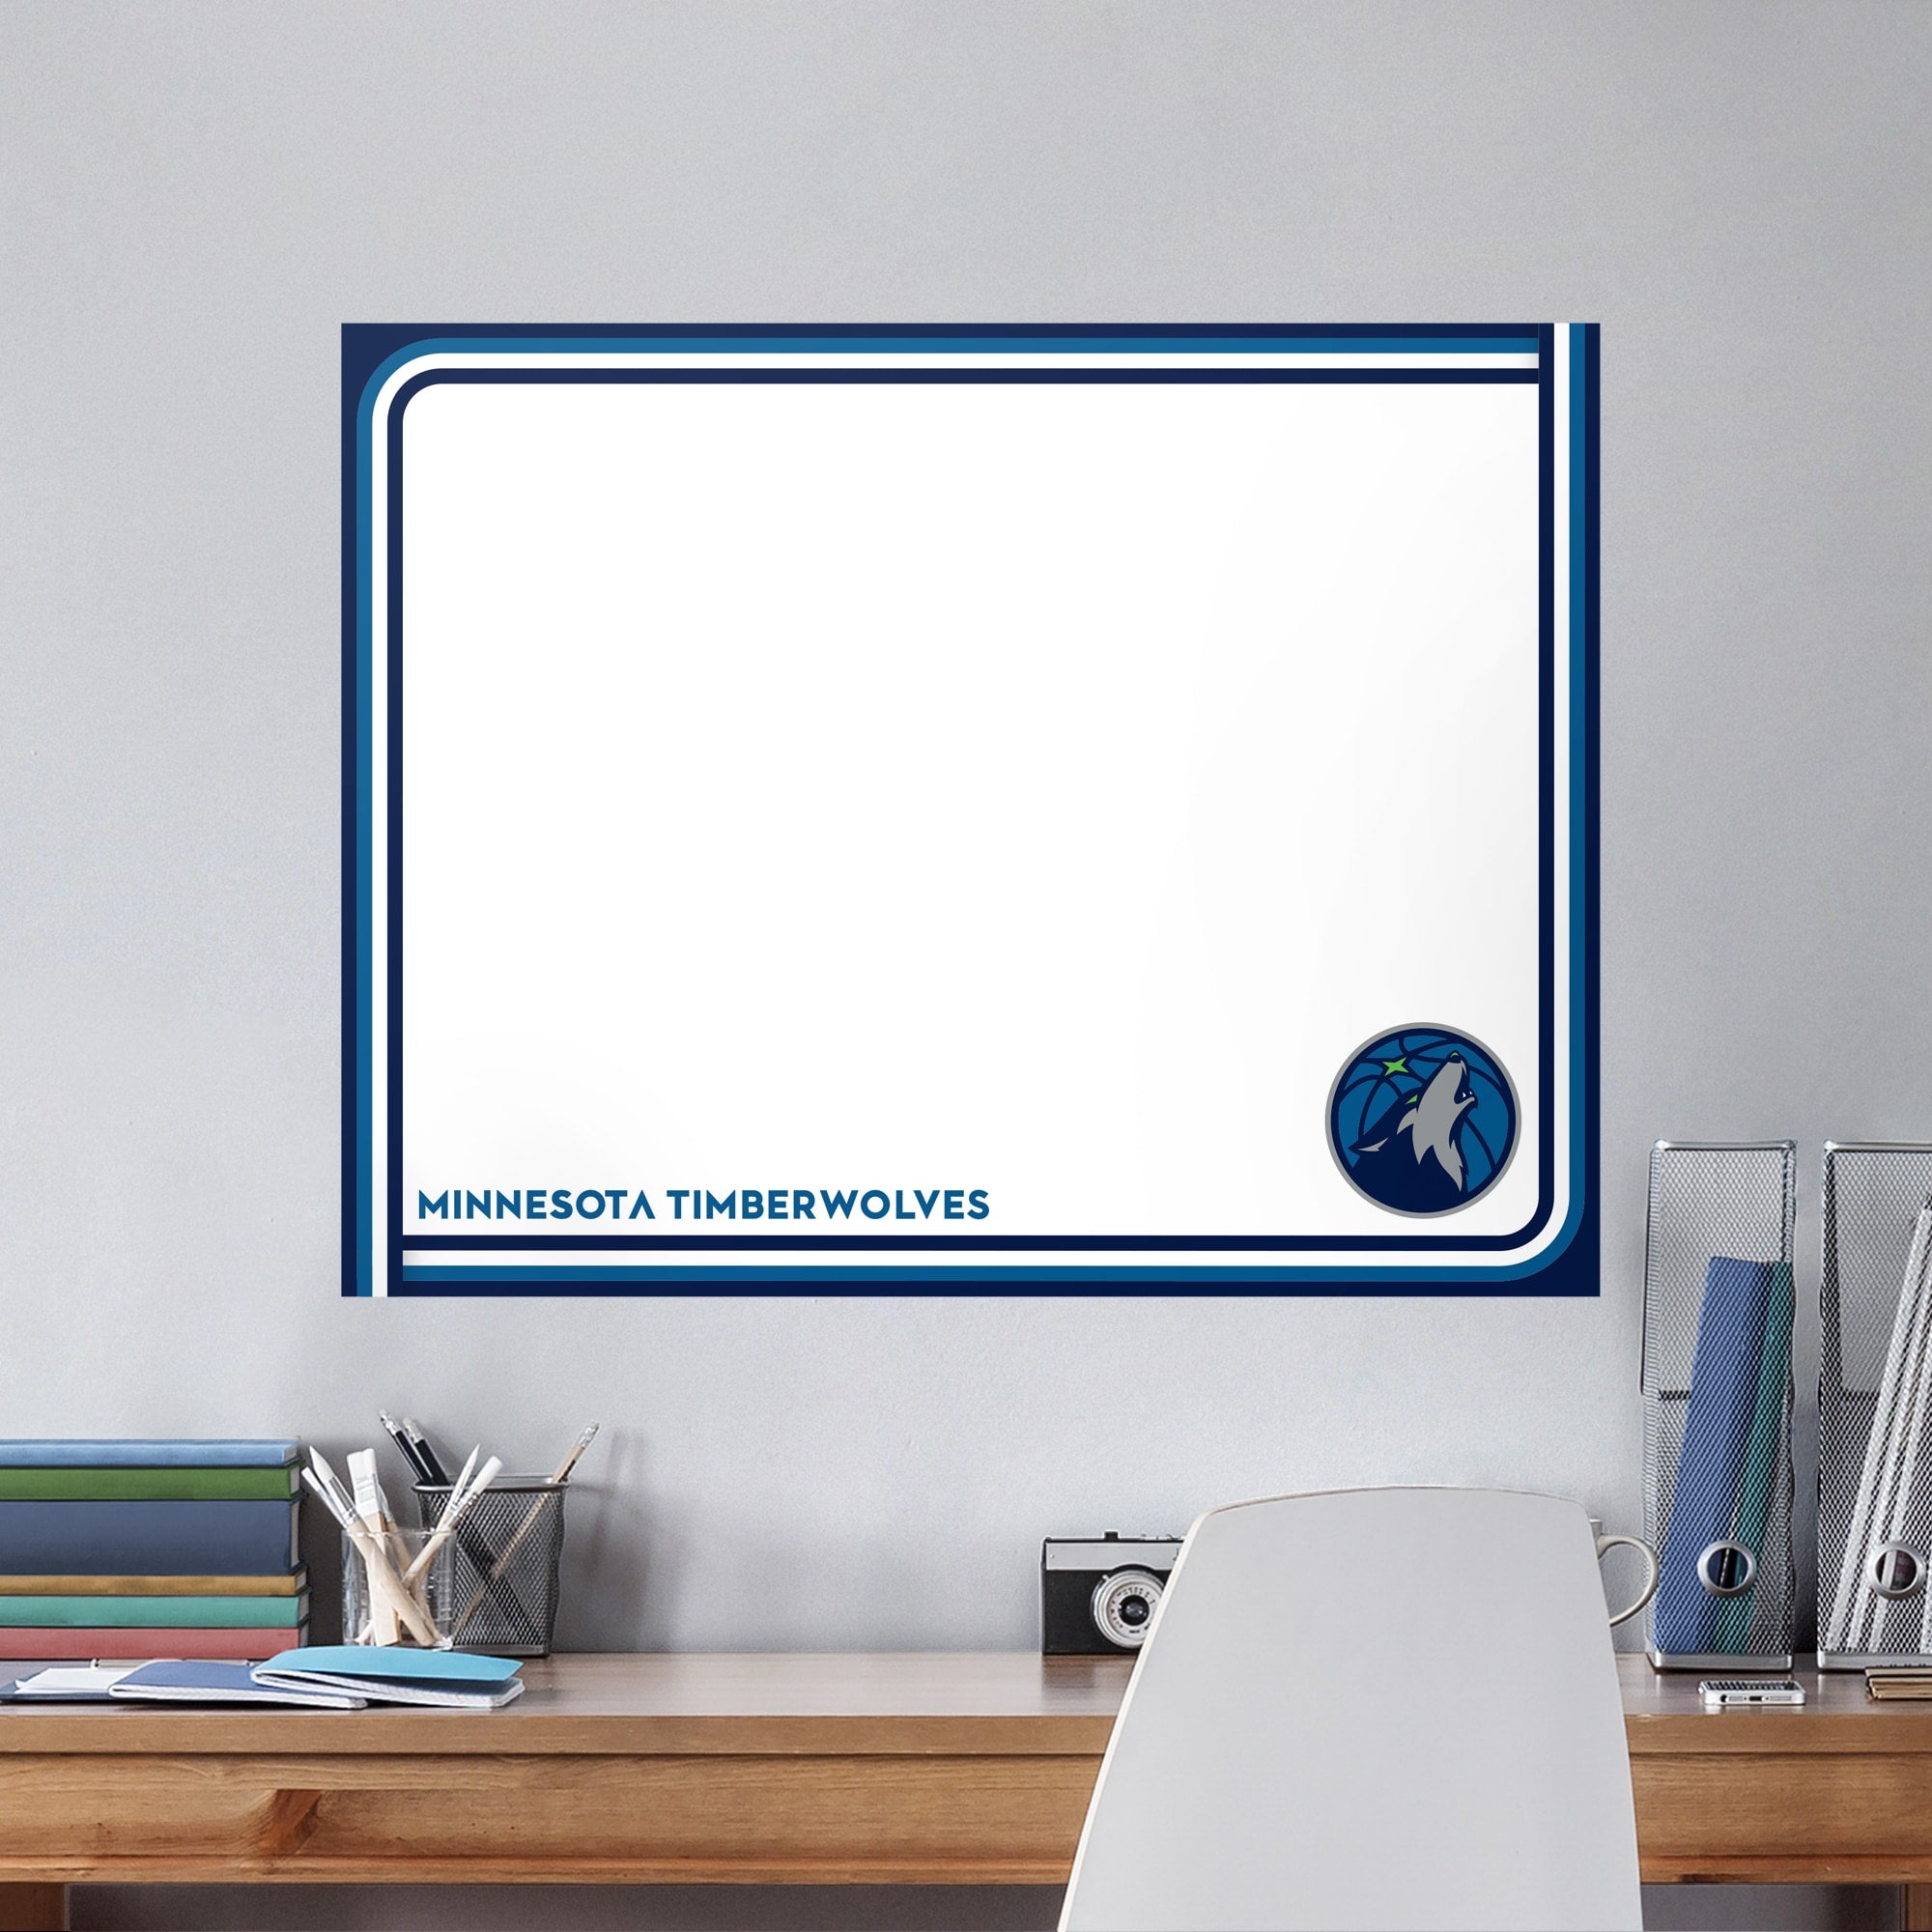 Minnesota Timberwolves for Minnesota Timberwolves: Dry Erase Whiteboard - Officially Licensed NBA Removable Wall Decal XL by Fat